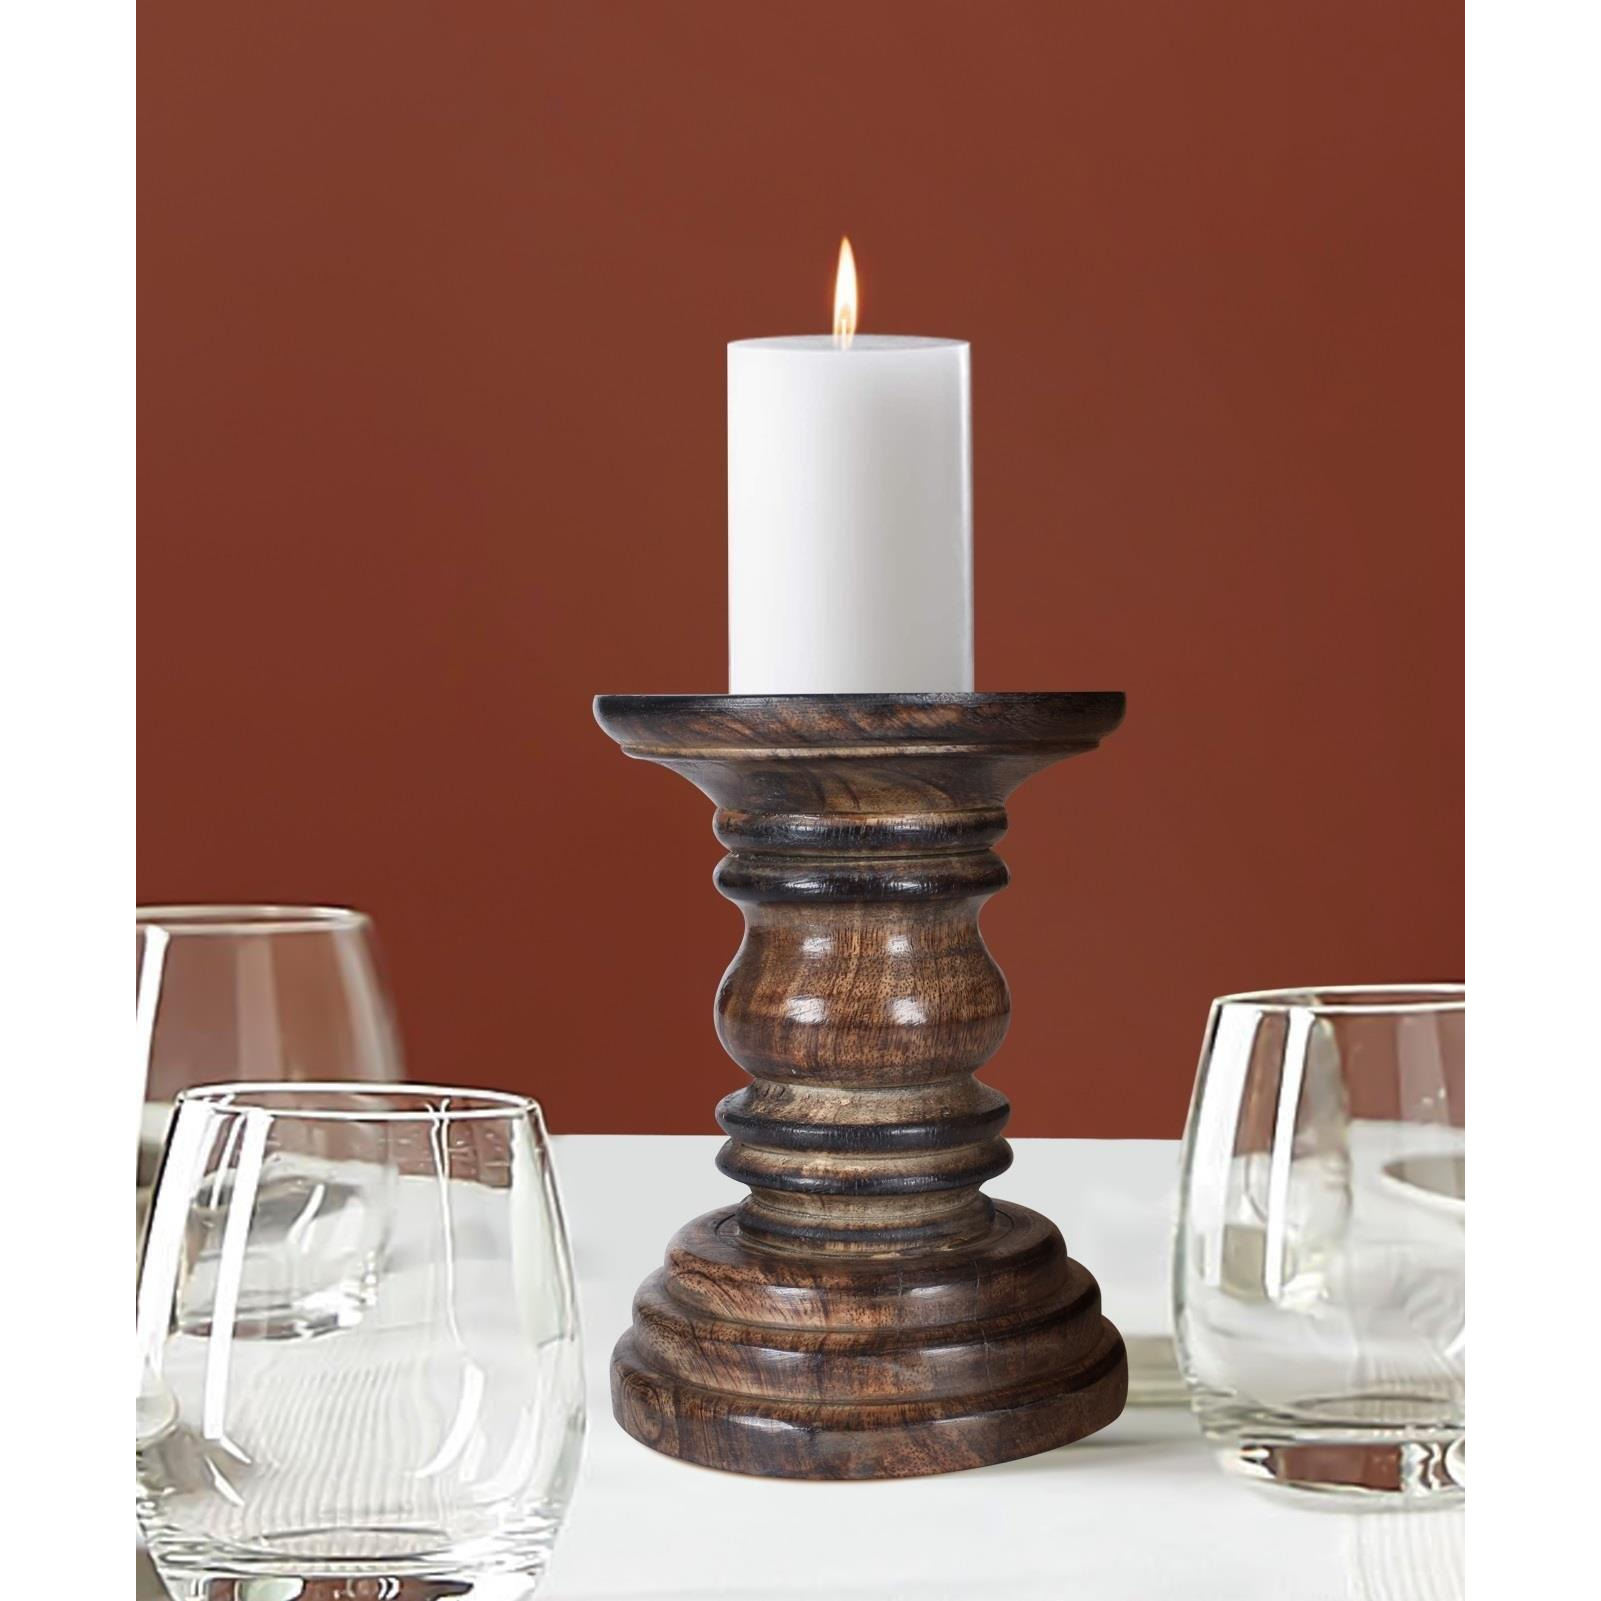 Rustic Antique Carved Wooden Pillar Church Candle Holder Natural, Medium 19cm high - image 1